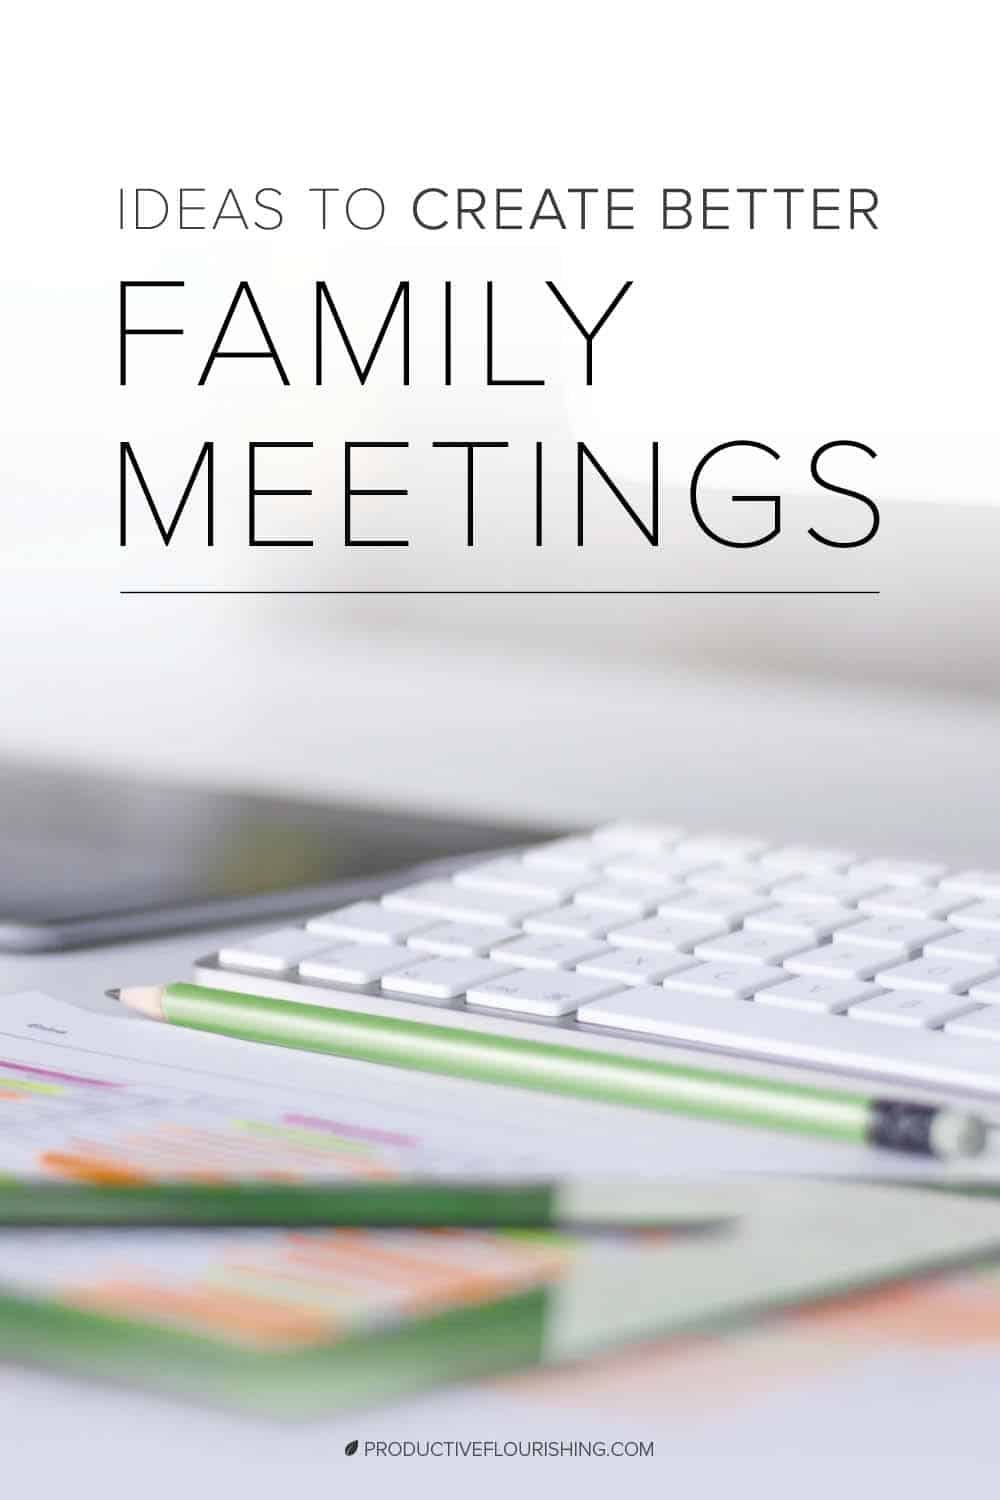 3 ways you can refresh and update your family meetings (scrums) as circumstances change. #familymeeting #productivity #productiveflourishing